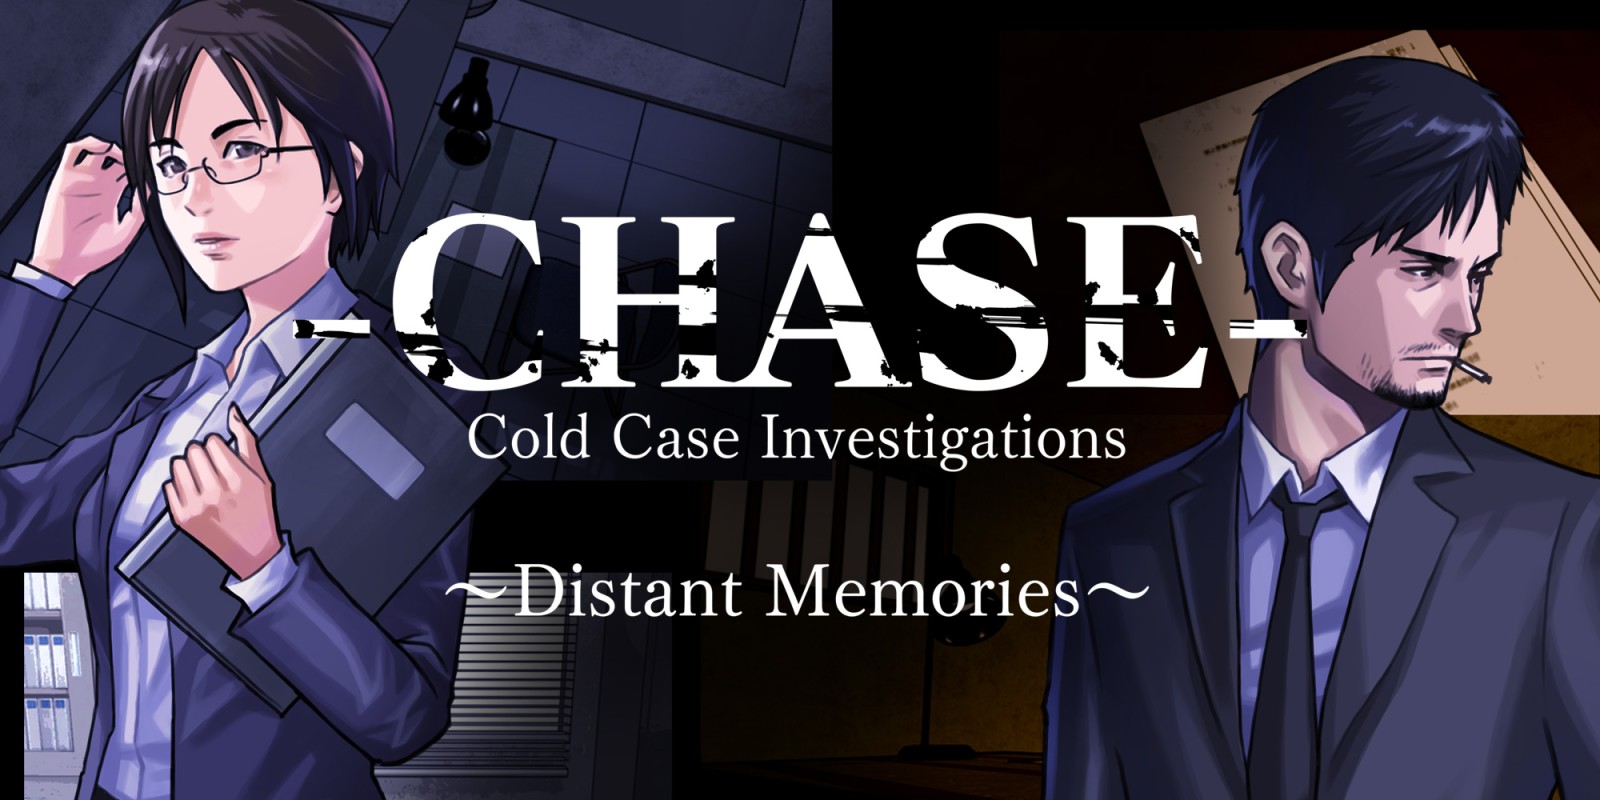 H2x1_3DSDS_ChaseColdCaseInvestigationsDistantMemories_image1600w.jpg